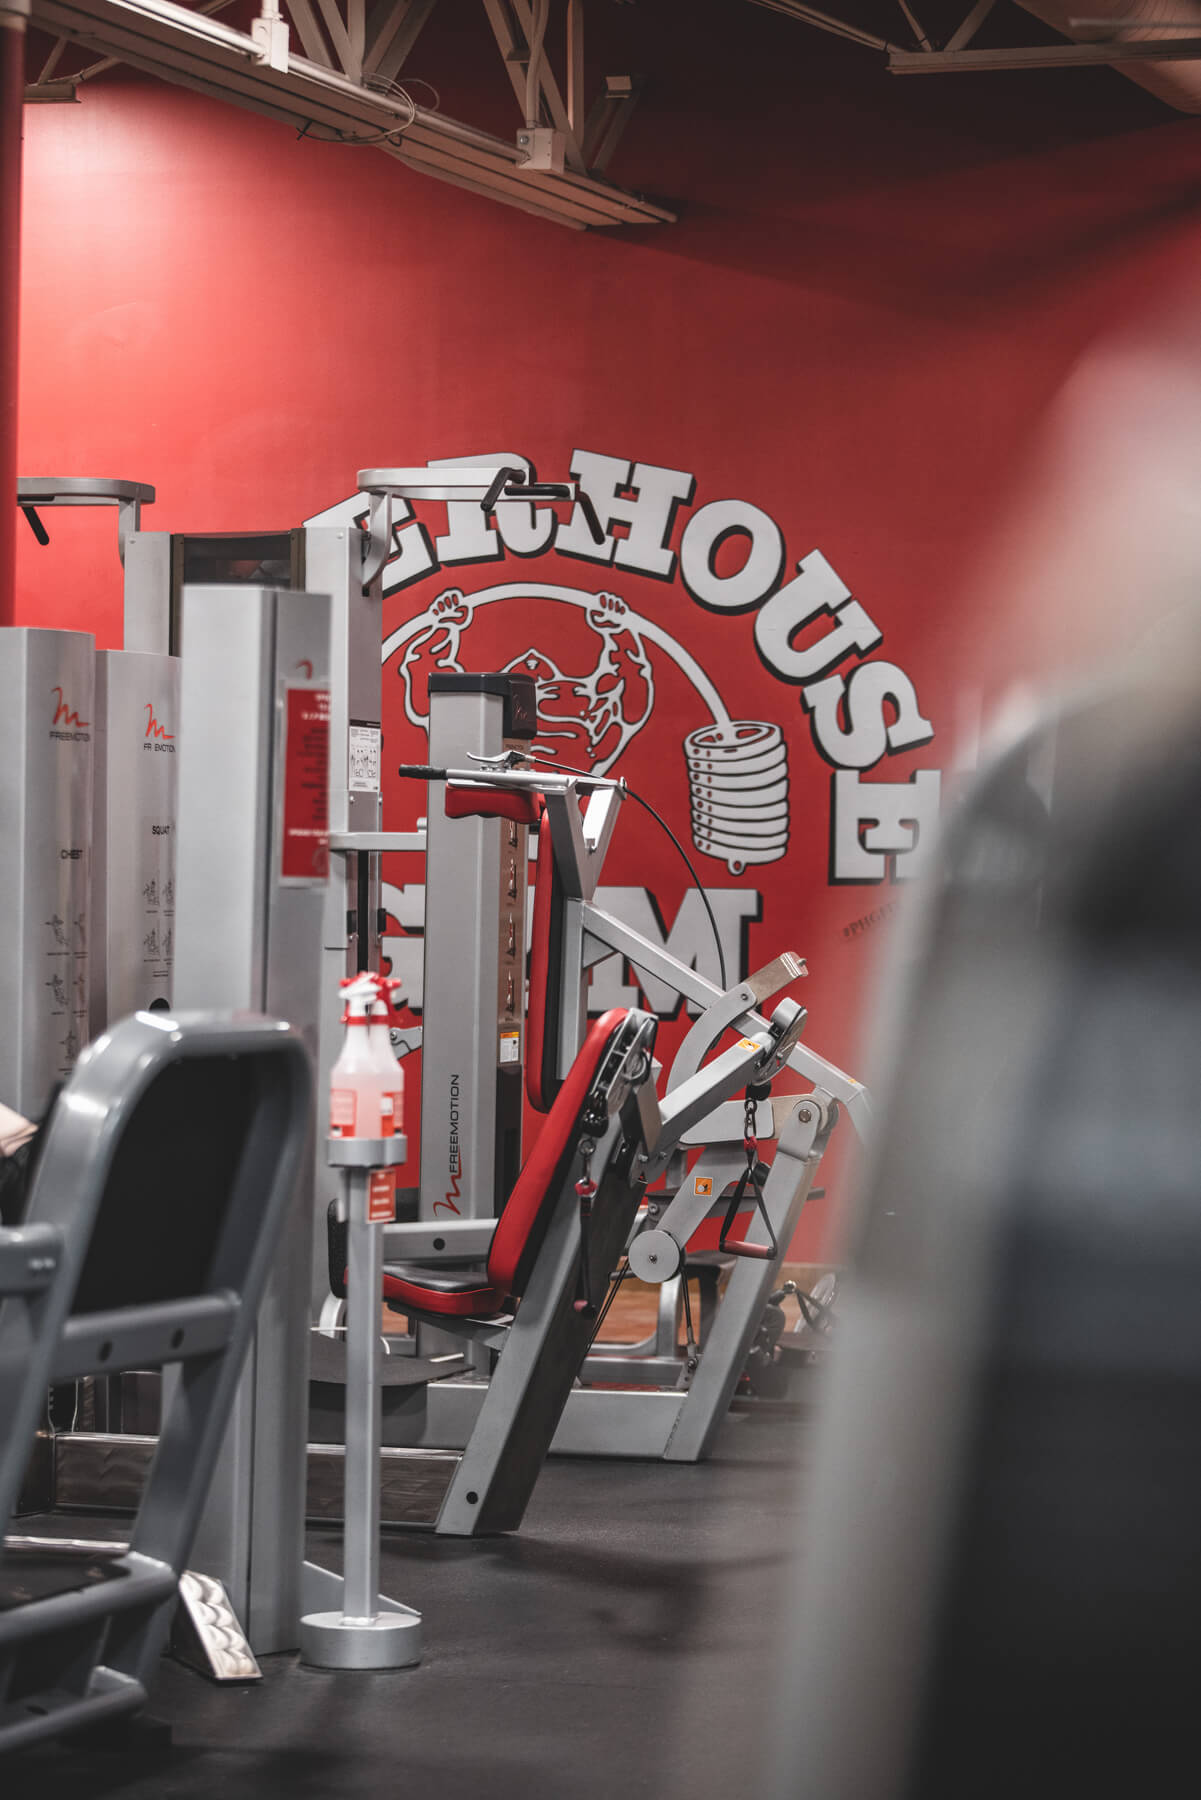 An Thumbnail Image of the Troy, MI Powerhouse Gym Location